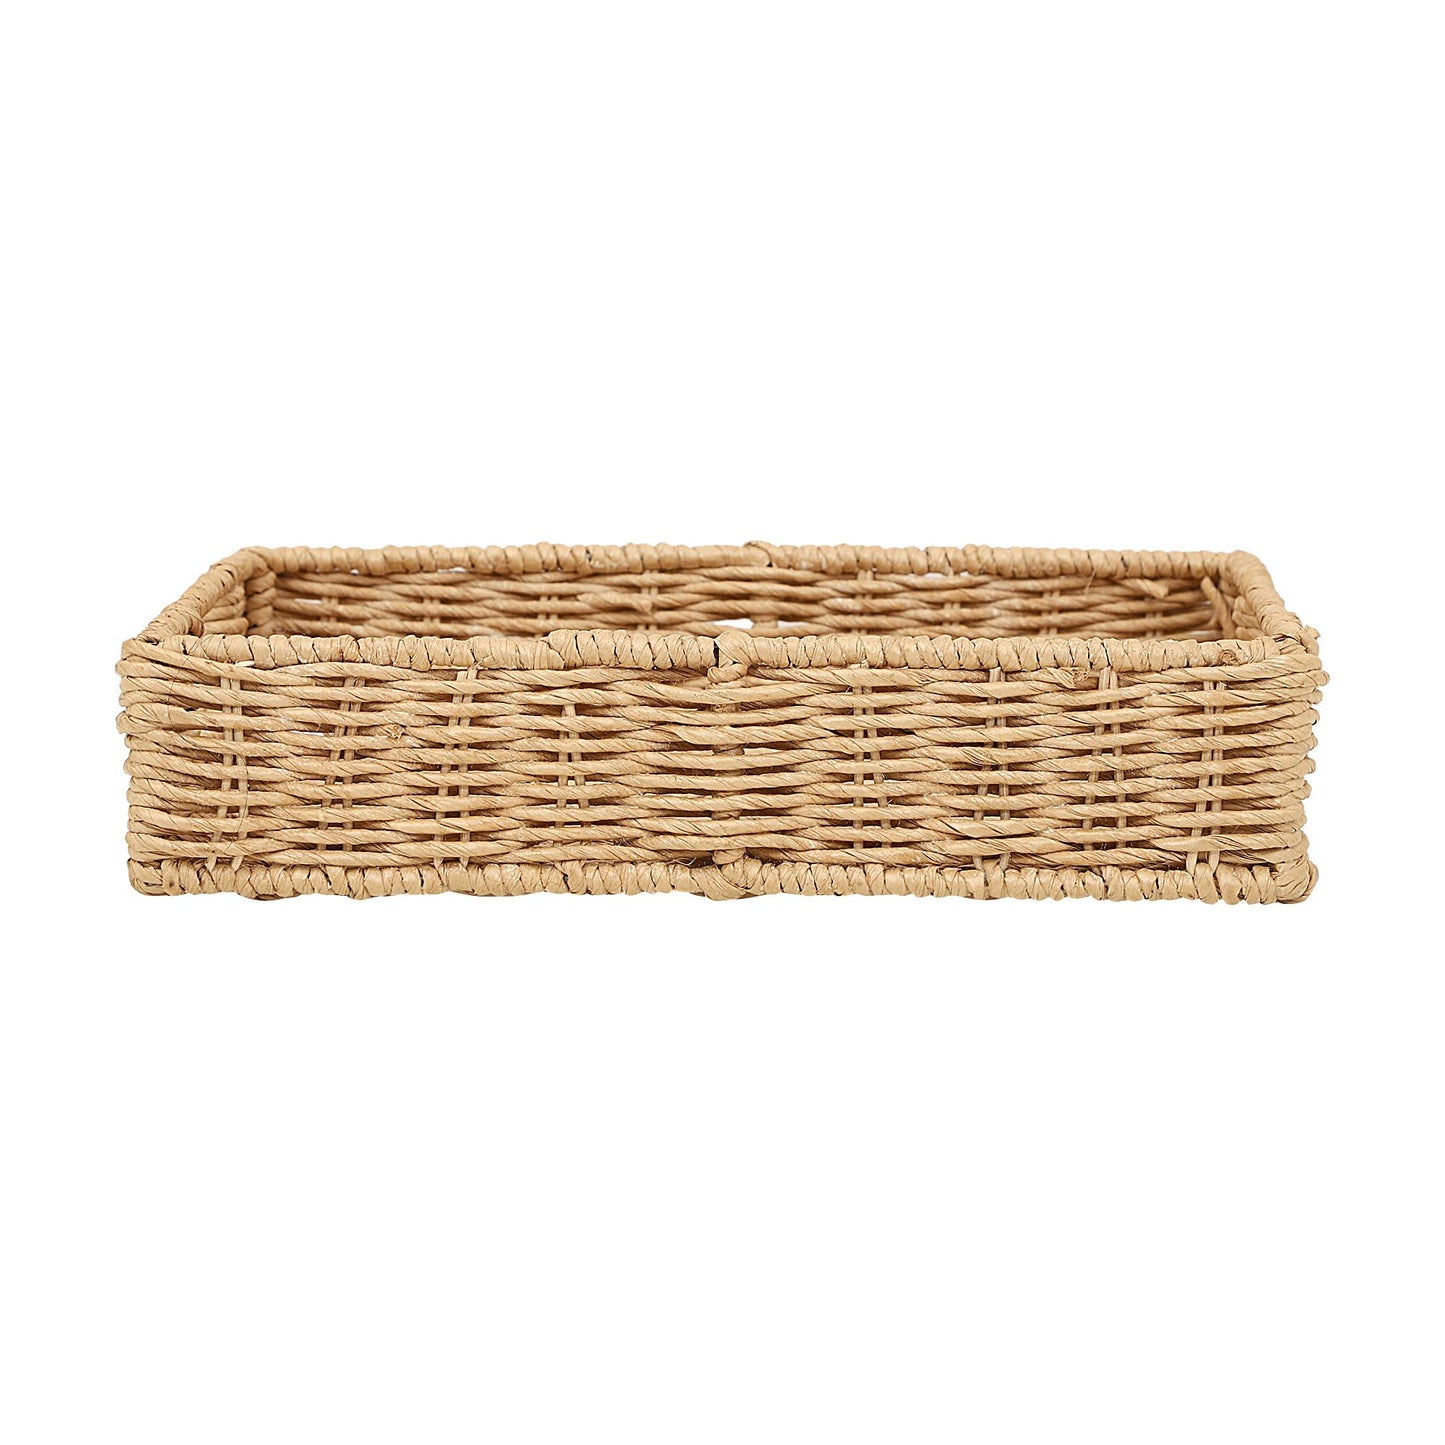 AKWAY Wicker Seagrass Water Hyacinth Kauna Grass Serving Tray Serving Tray for Home | Dining Table Decorative Trays | Serving Tray | Platter with Handles Diwali or Deepawali Gifts | 11" x 8" x 3" - Akway